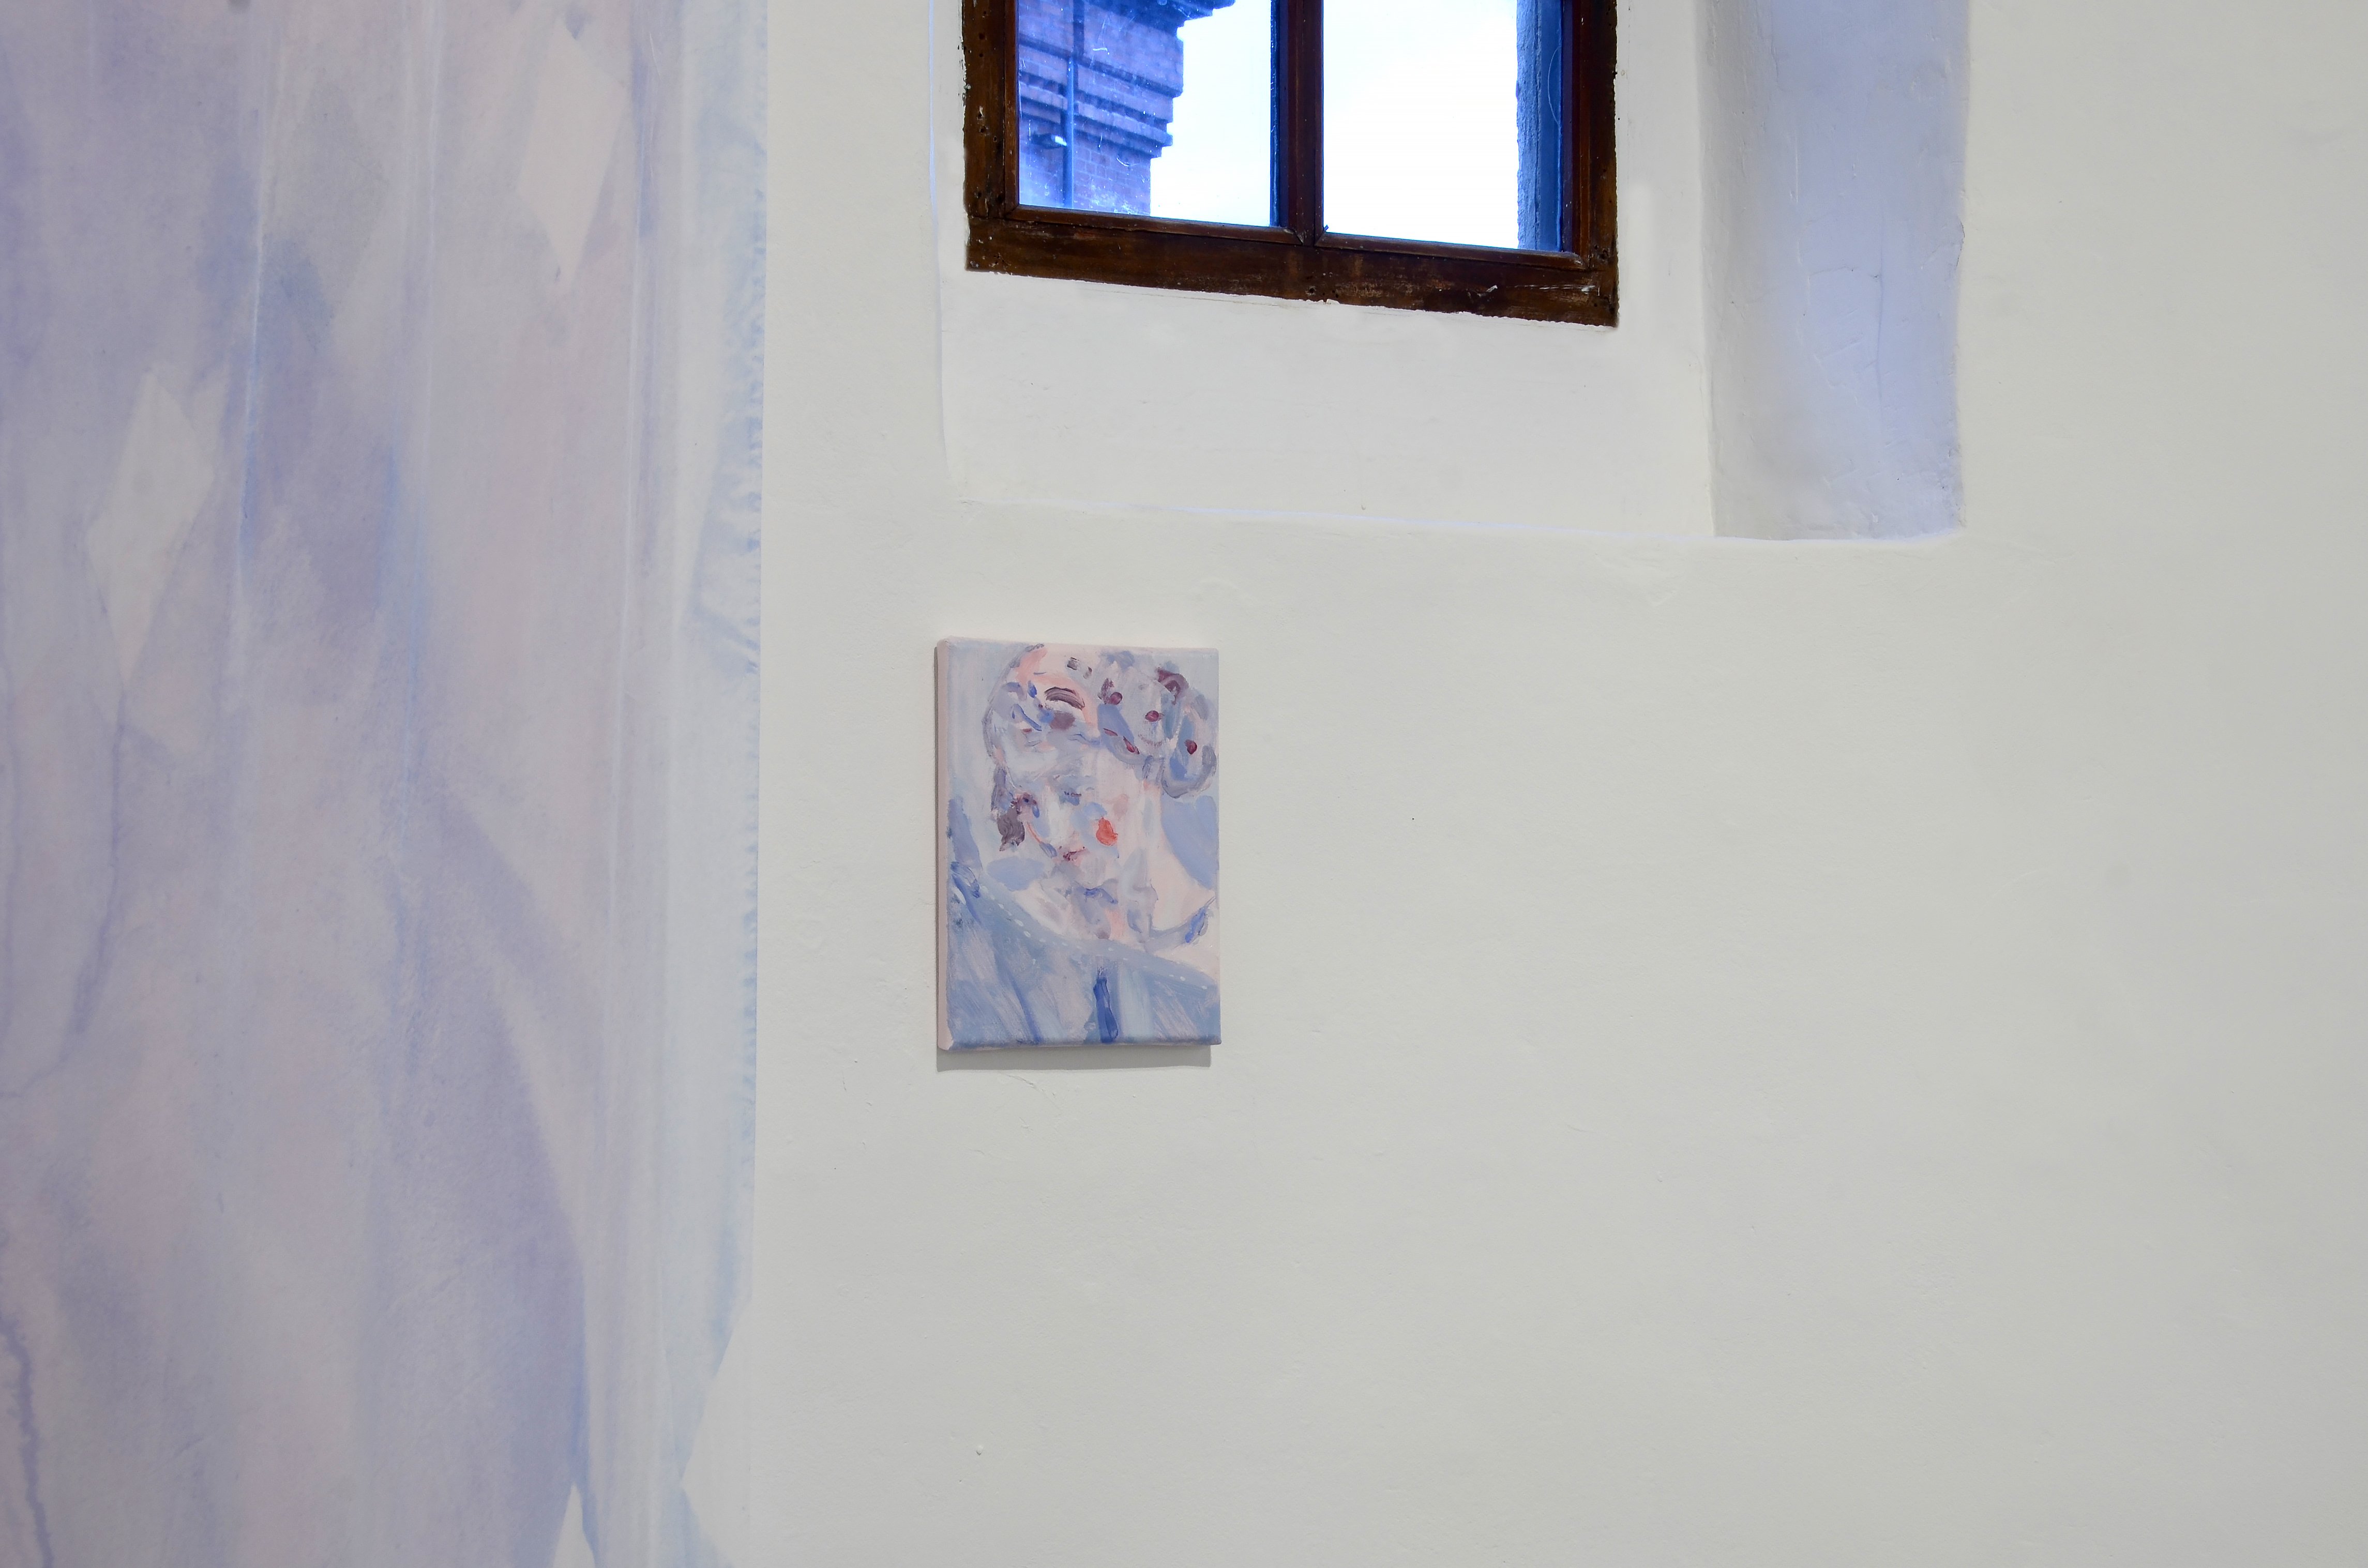 Come fail at love exhibition by Casper White. Image includes a silk veil that falls from ceiling to floor and a painting of a Neapolitan creche figure from The Met Museum